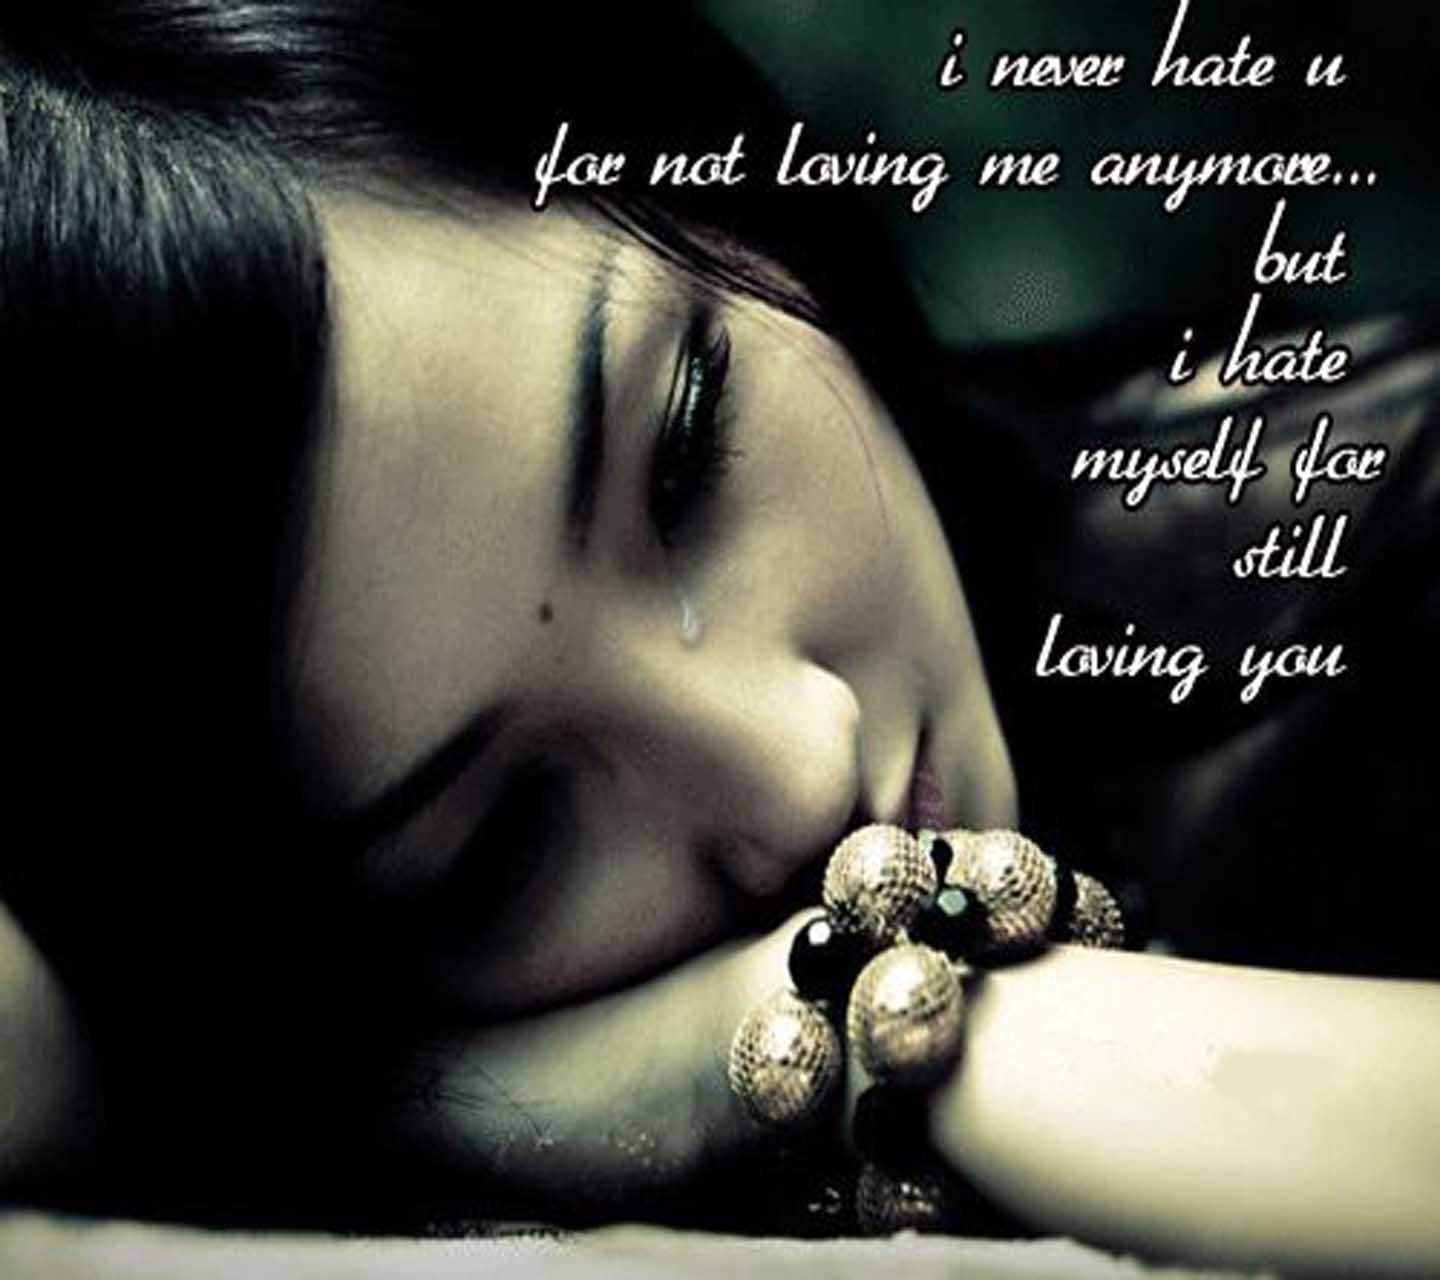 I Hate You - Hate Myself For Still Loving You , HD Wallpaper & Backgrounds